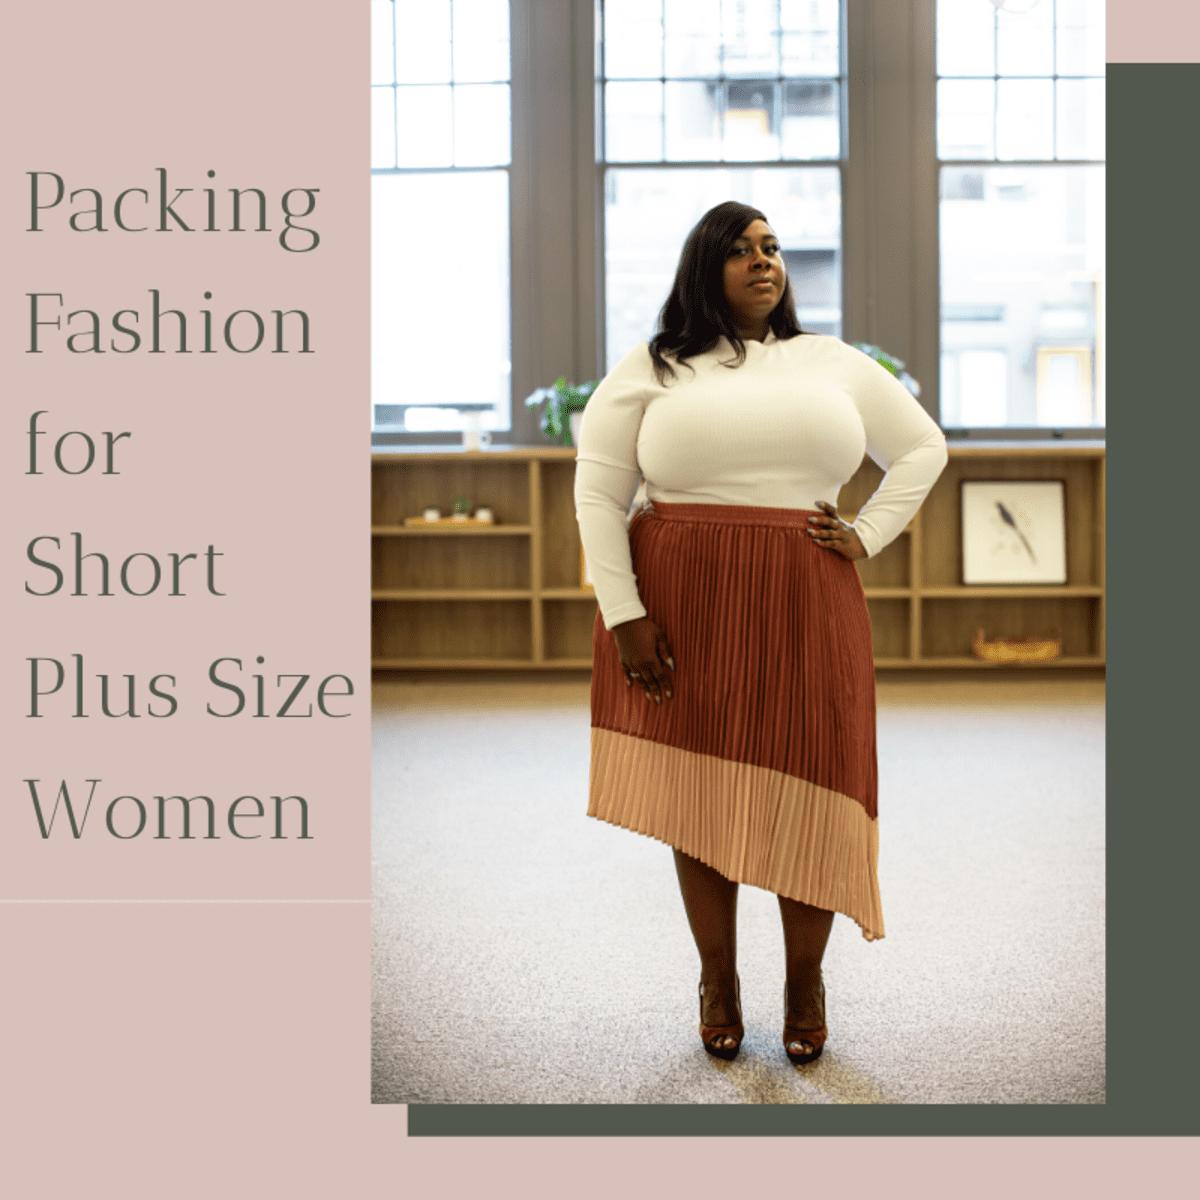 Packing Fashion for Plus Size Petite ...